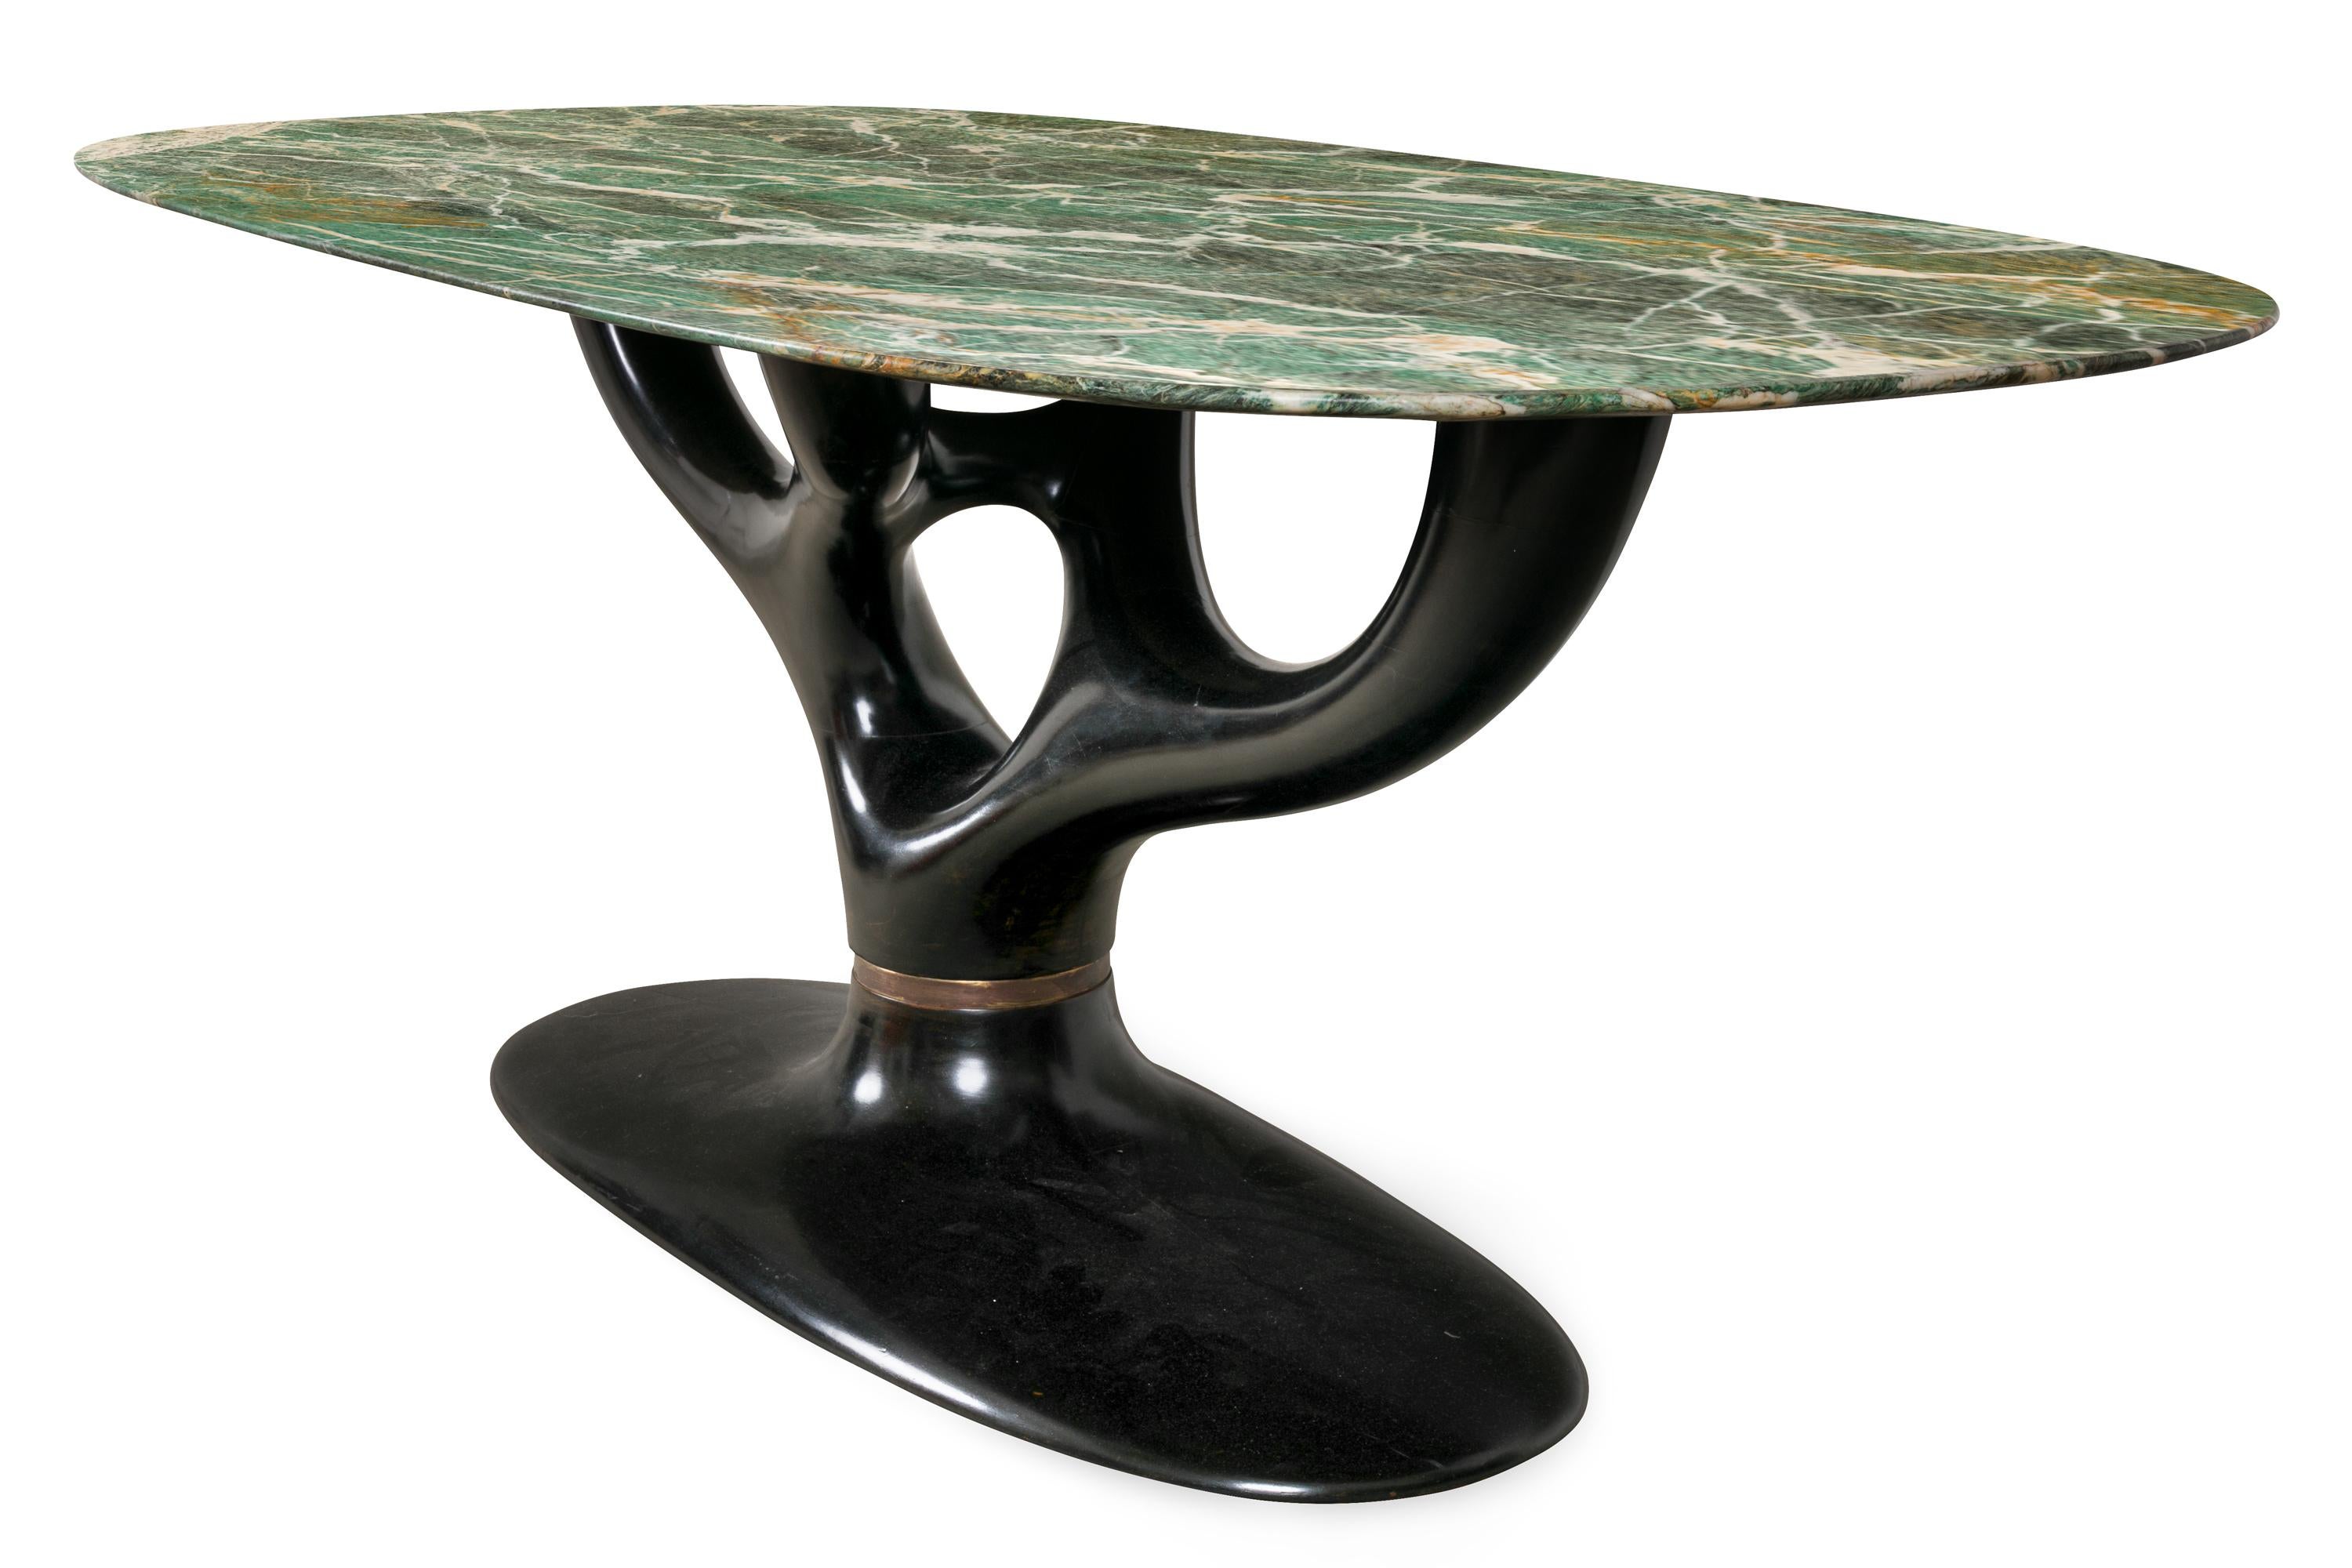 An amazing table with incredibly beautiful Italian marble and a spectacular ebonized organic base.